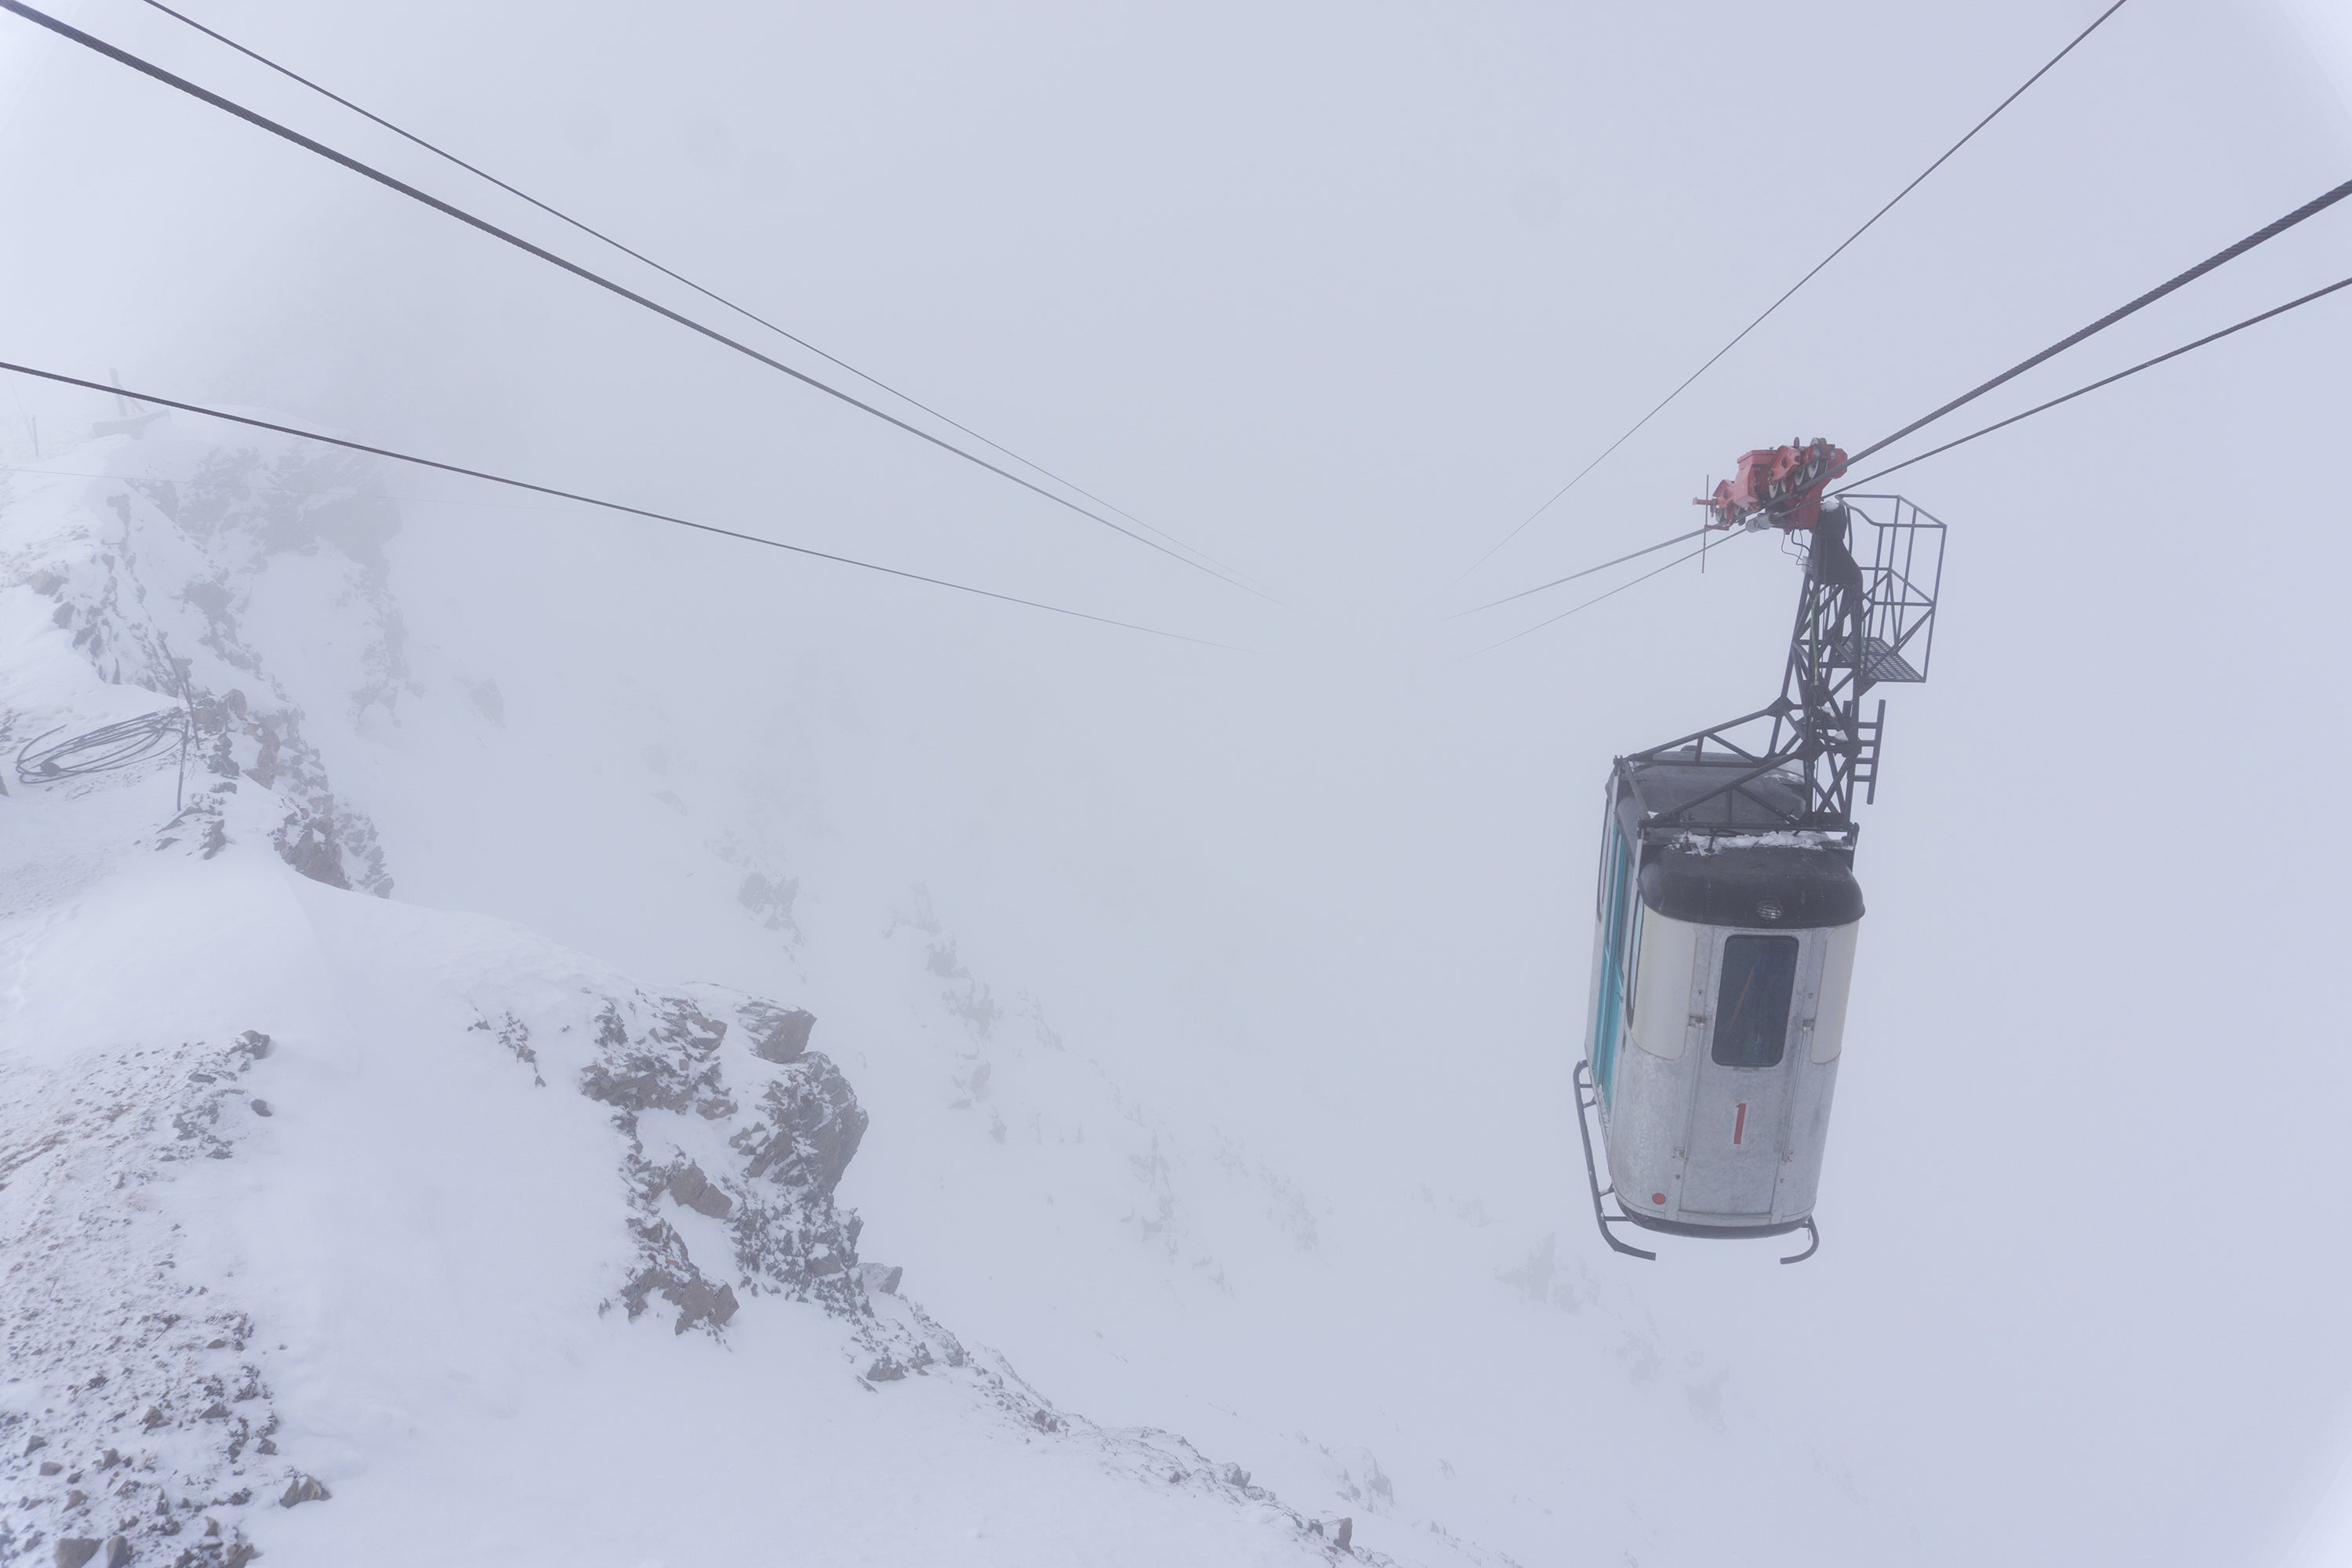 Small skier tram in clouds